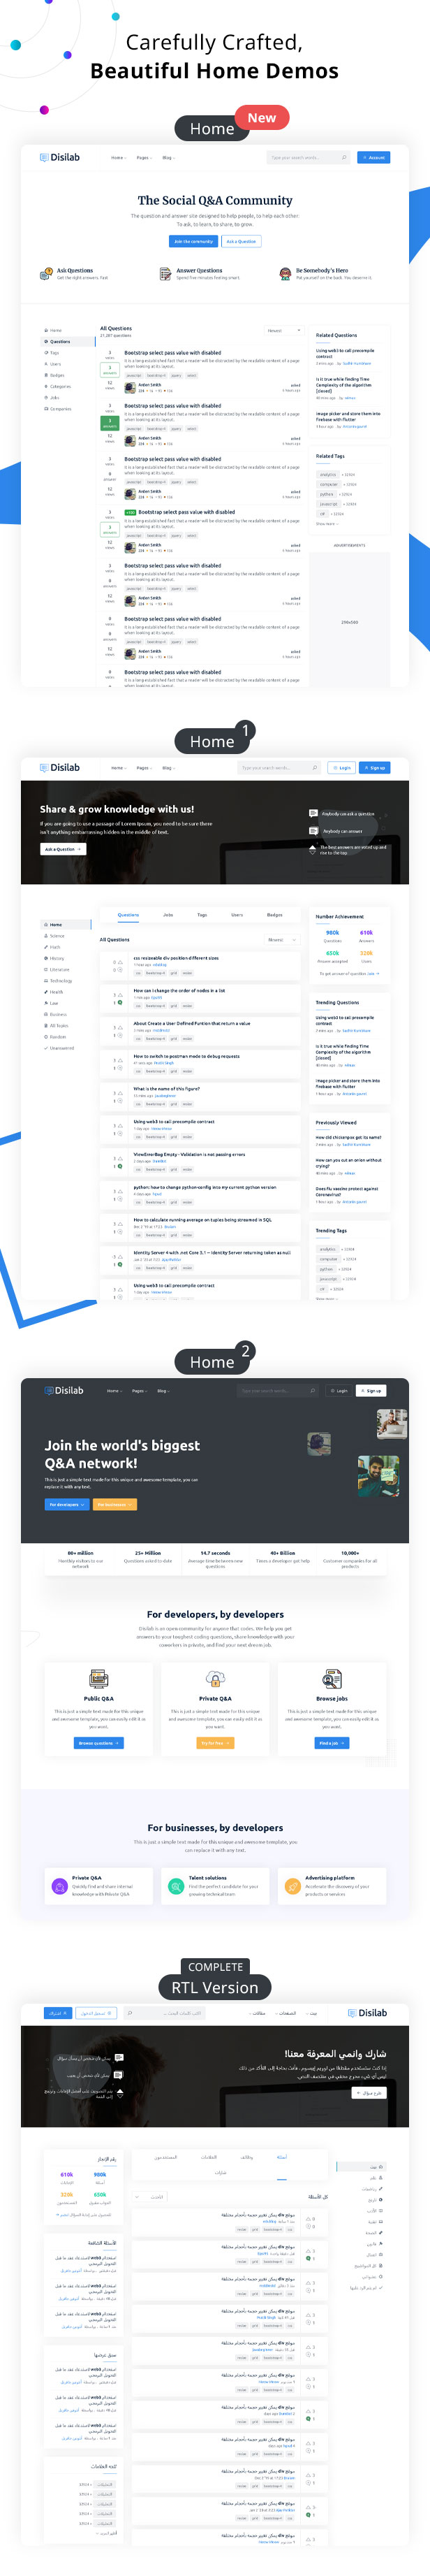 Disilab - Social Questions and Answers HTML5 Template